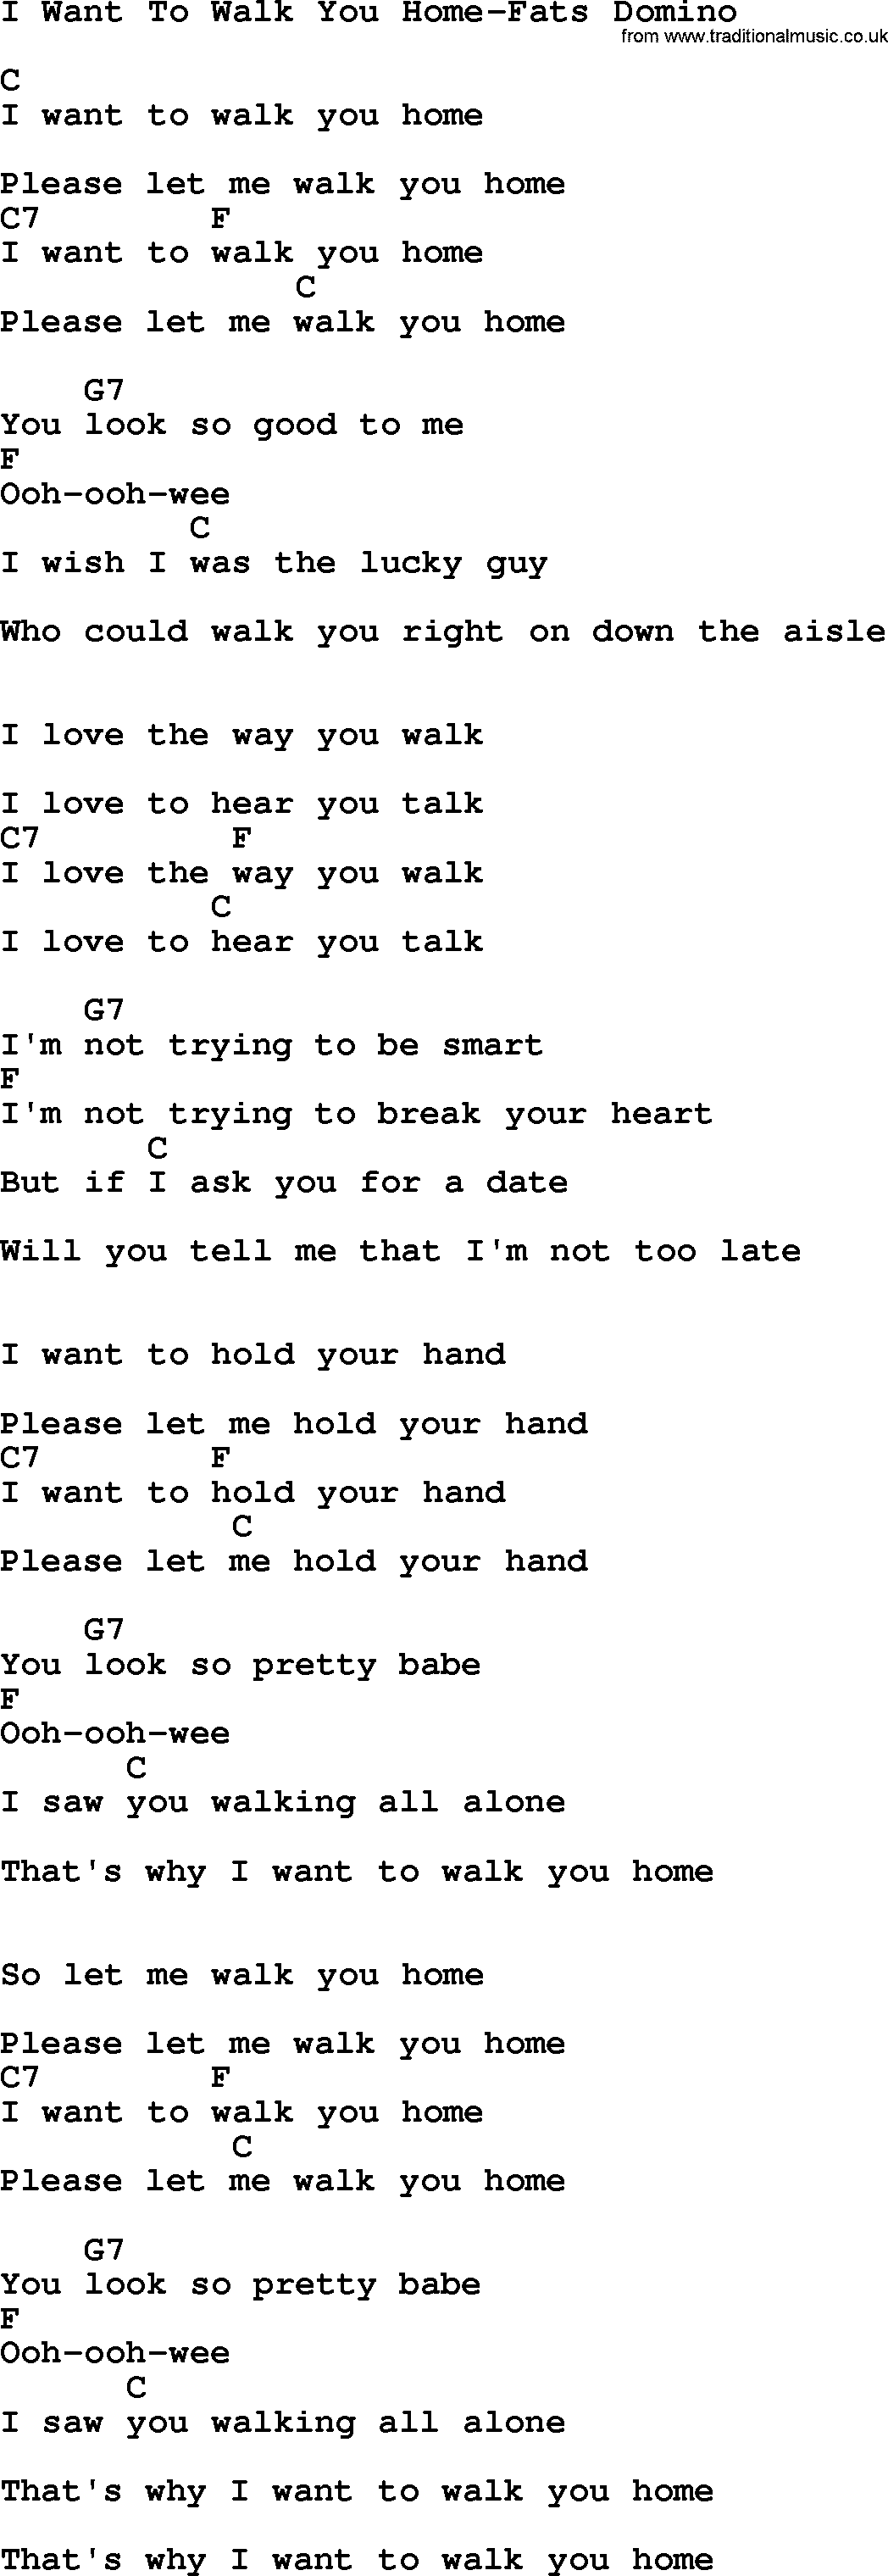 Country music song: I Want To Walk You Home-Fats Domino lyrics and chords